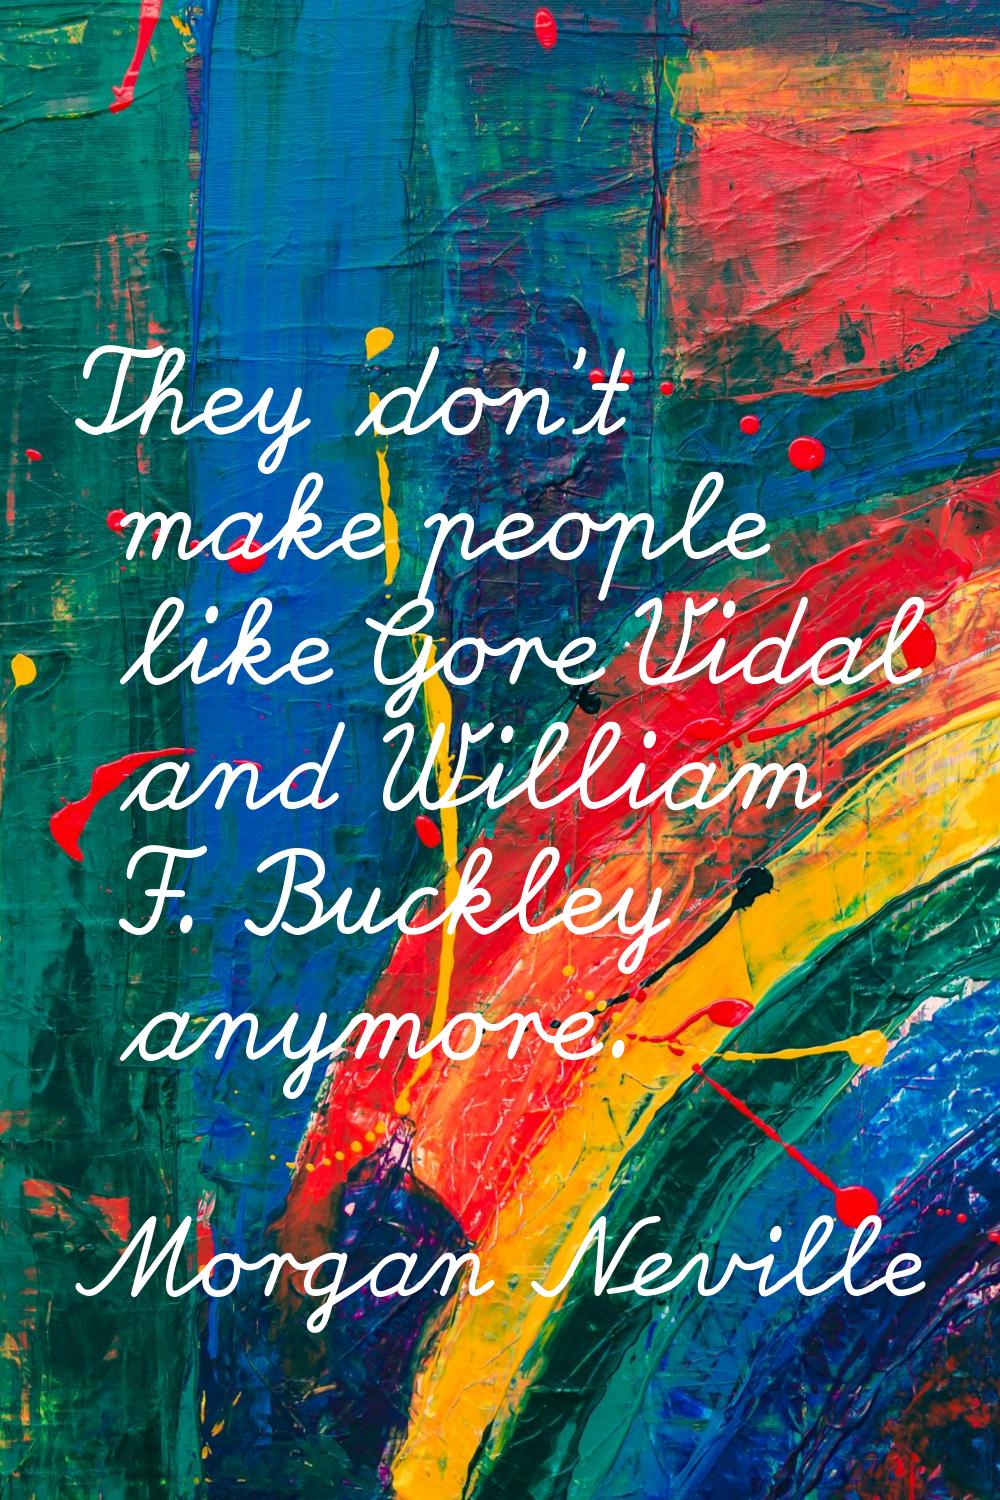 They don't make people like Gore Vidal and William F. Buckley anymore.